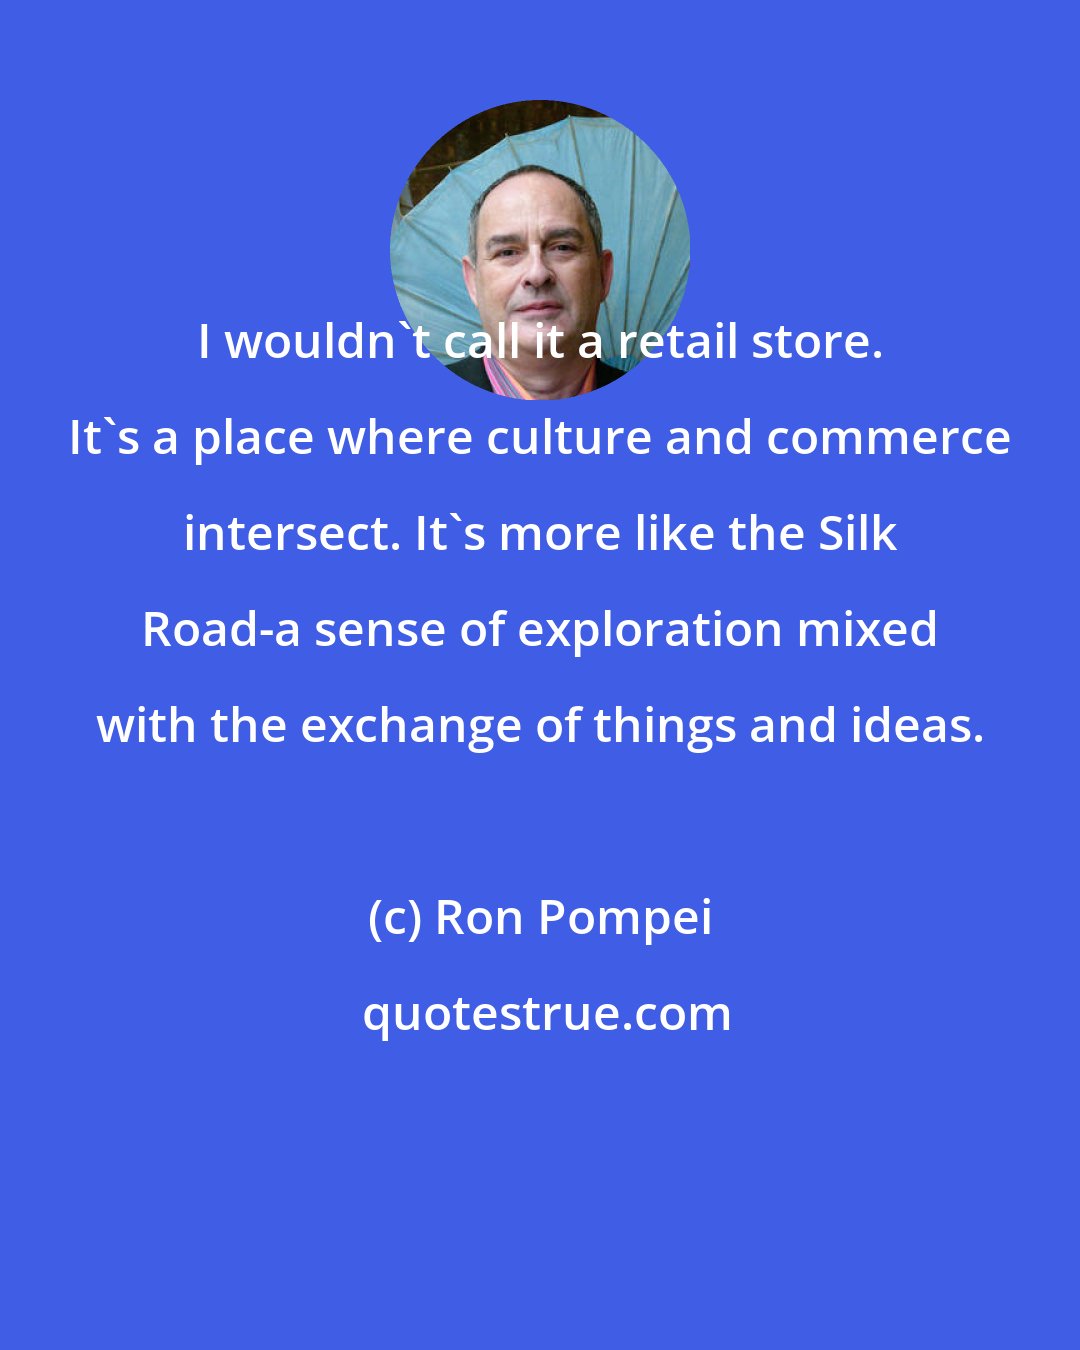 Ron Pompei: I wouldn't call it a retail store. It's a place where culture and commerce intersect. It's more like the Silk Road-a sense of exploration mixed with the exchange of things and ideas.